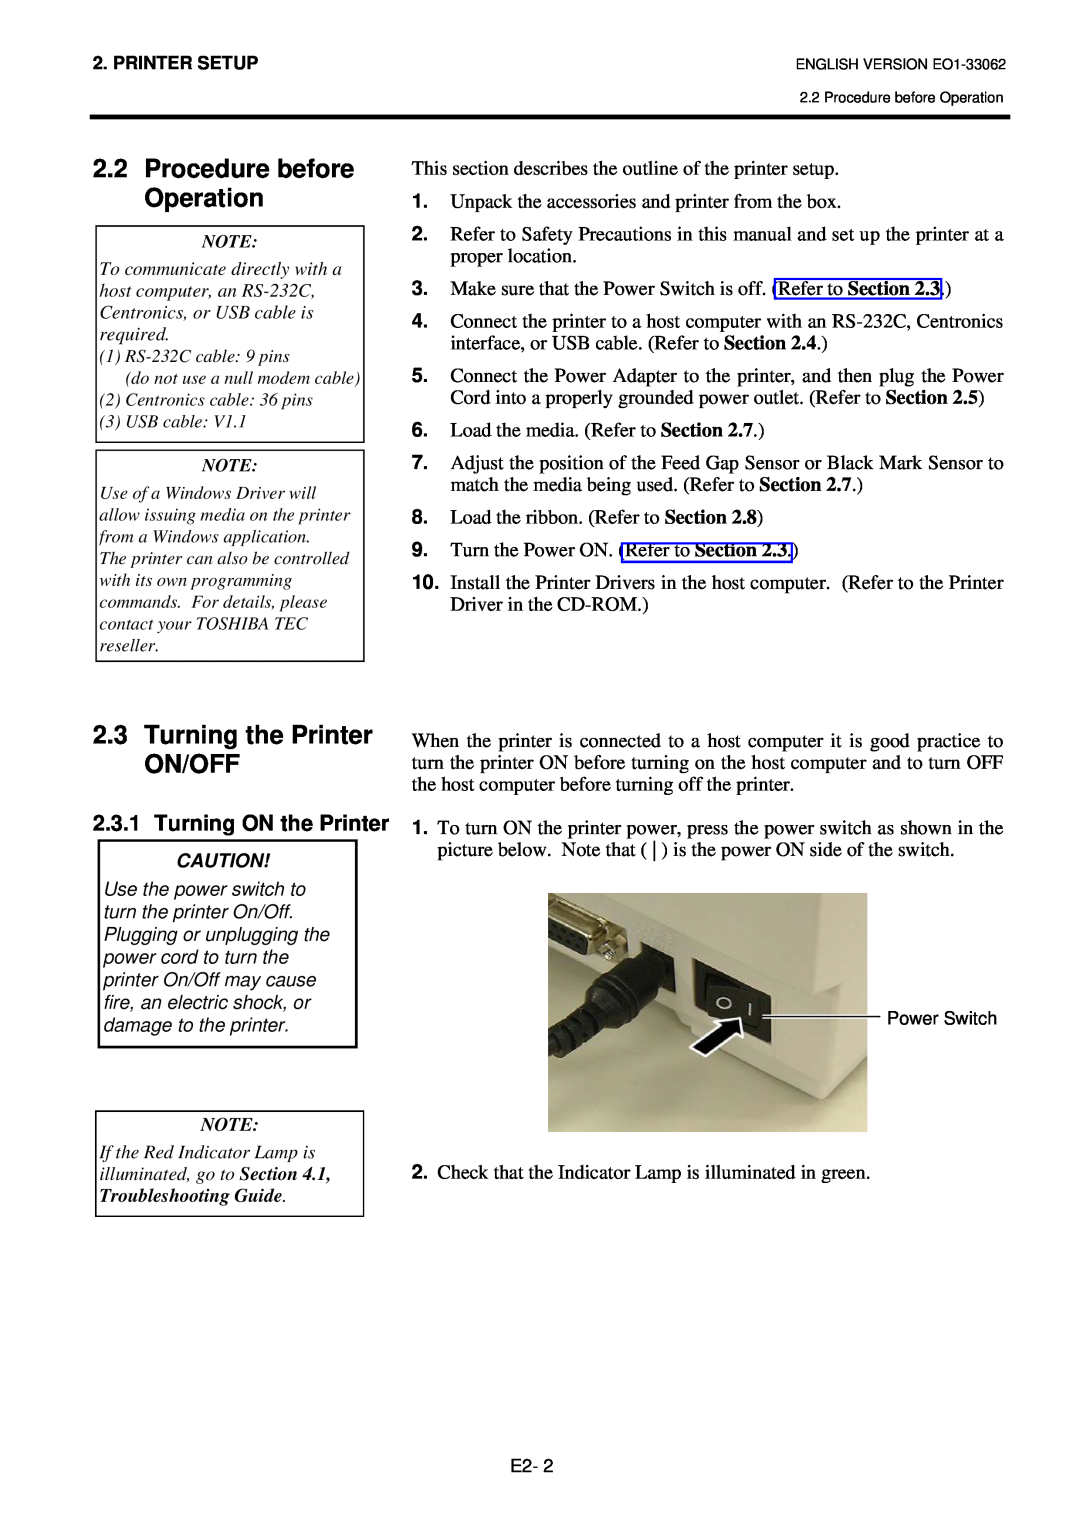 Toshiba B-SV4T owner manual Procedure before Operation, Turning the Printer ON/OFF, Turning ON the Printer 